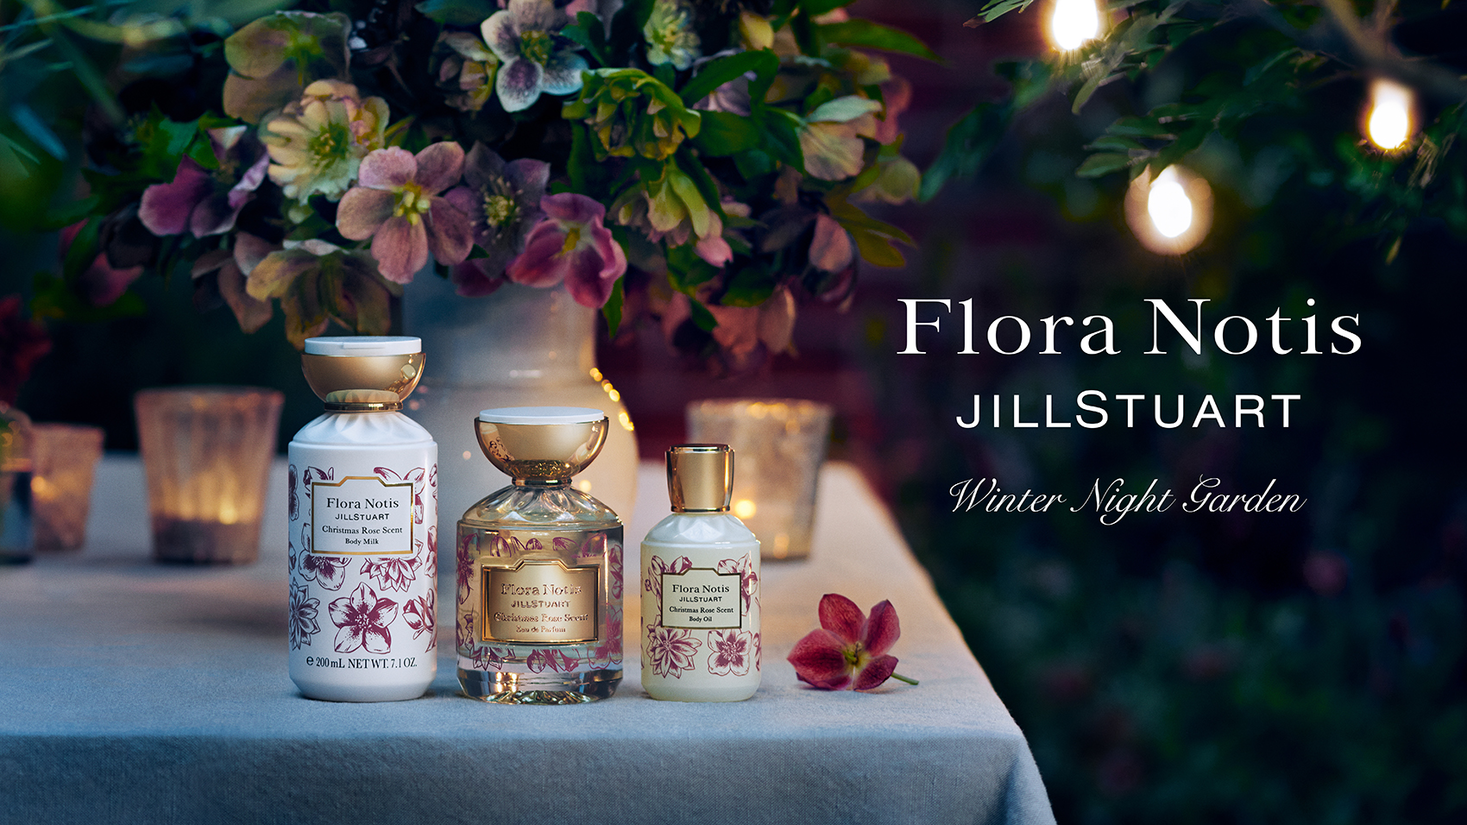 [Flora Notice Jill Stuart] Limited release of the holiday collection with the elegant "Christmas rose" that blooms in the garden at night in winter. thumbnail